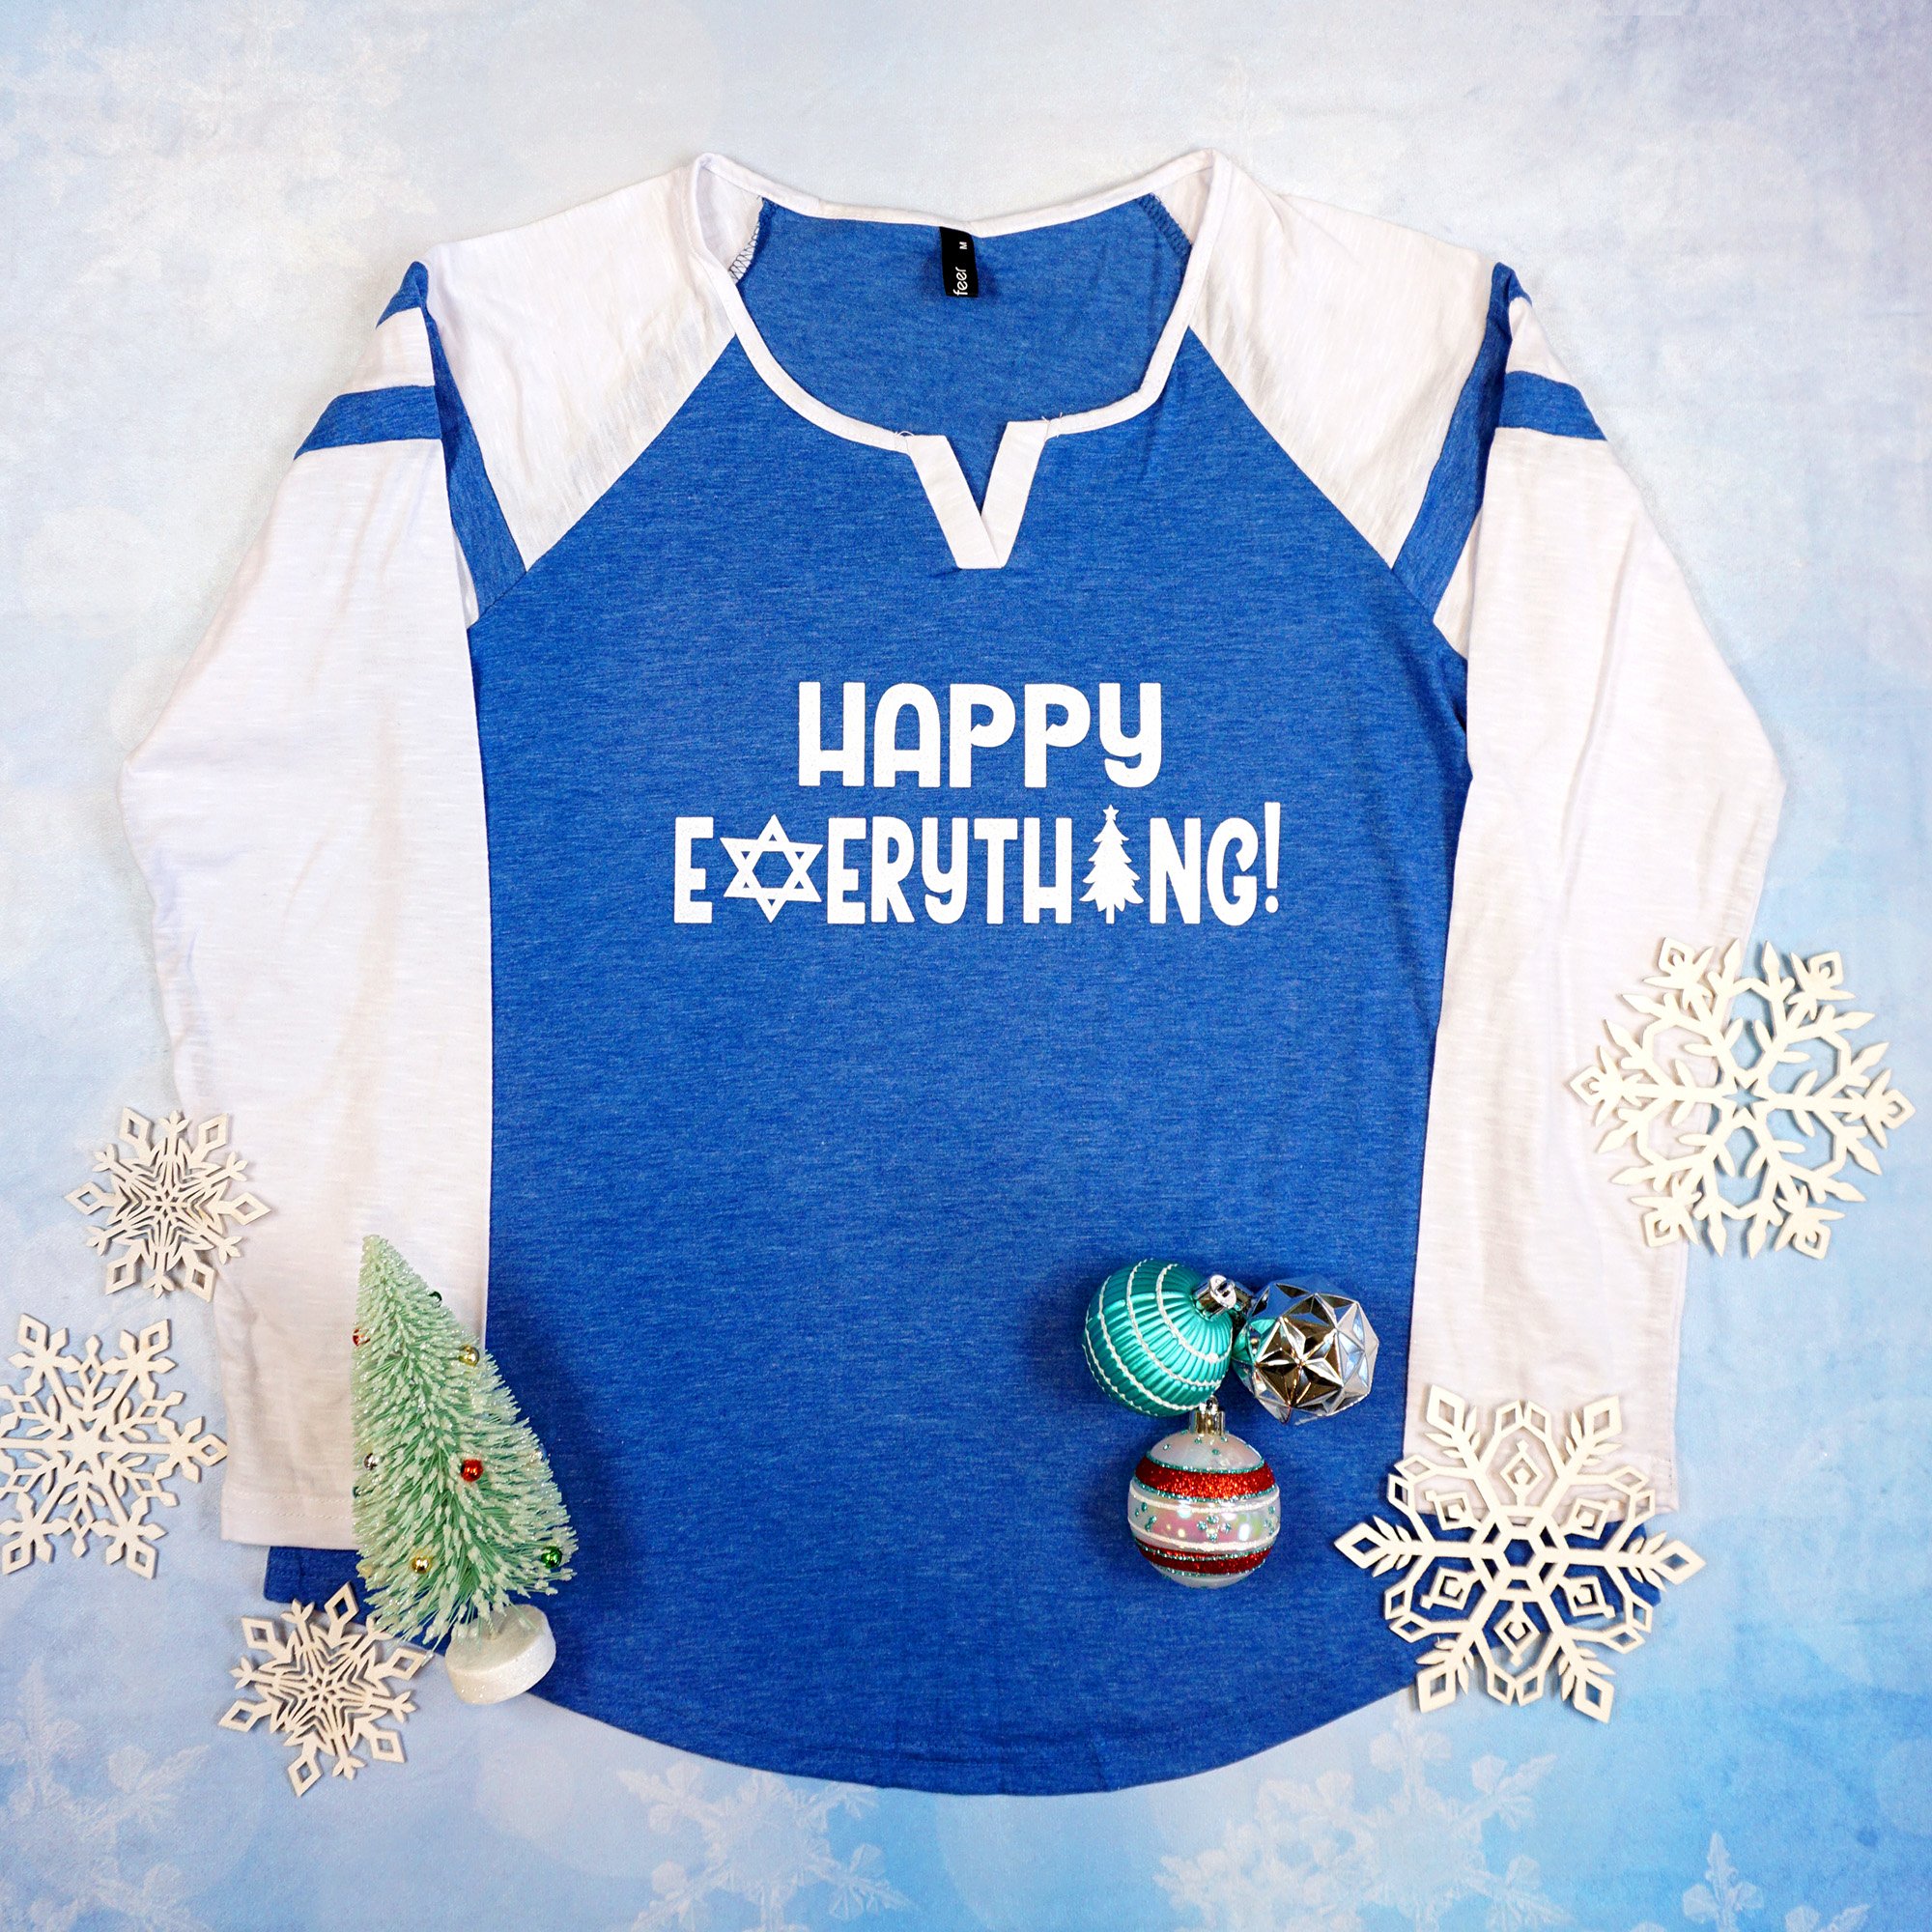 happy everything shirt with decorations